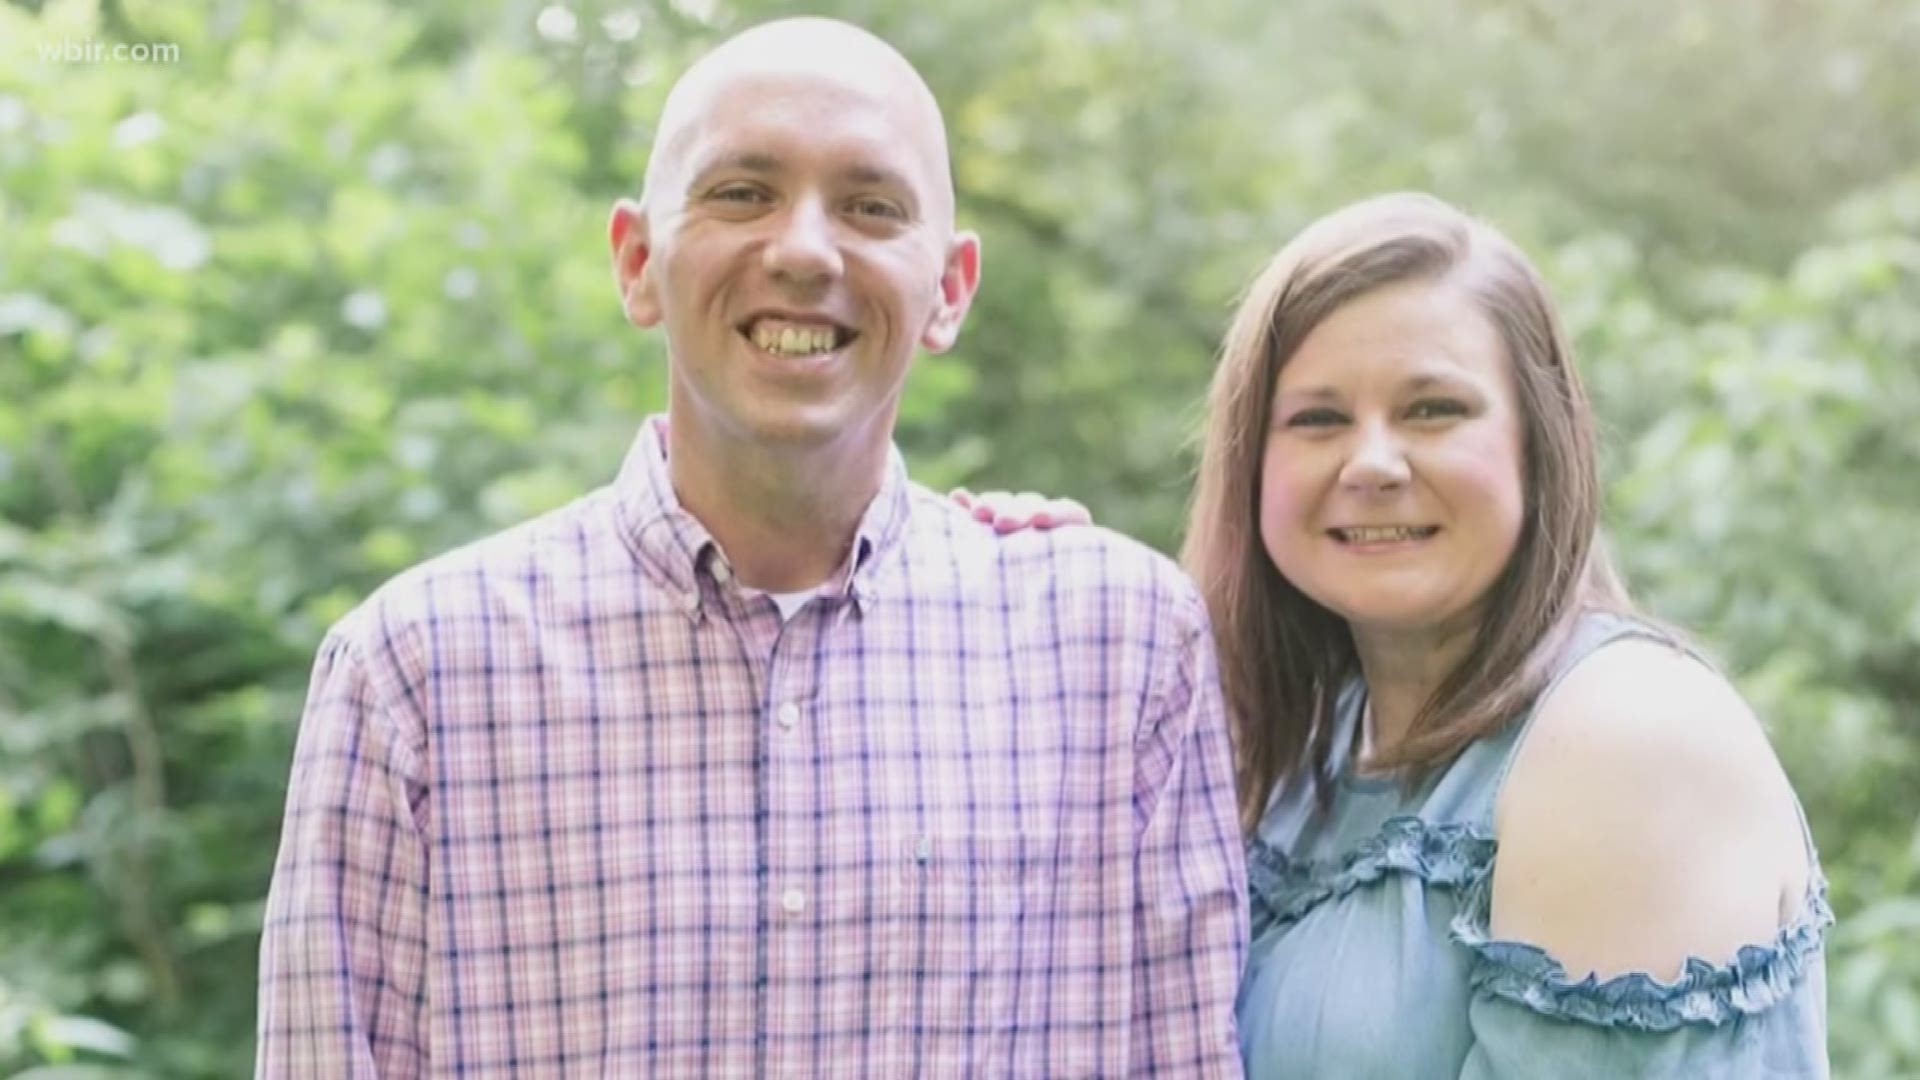 Terry and Jessica Darnell’s struggles with starting a family started 13 years ago. Now they have a bit of hope.